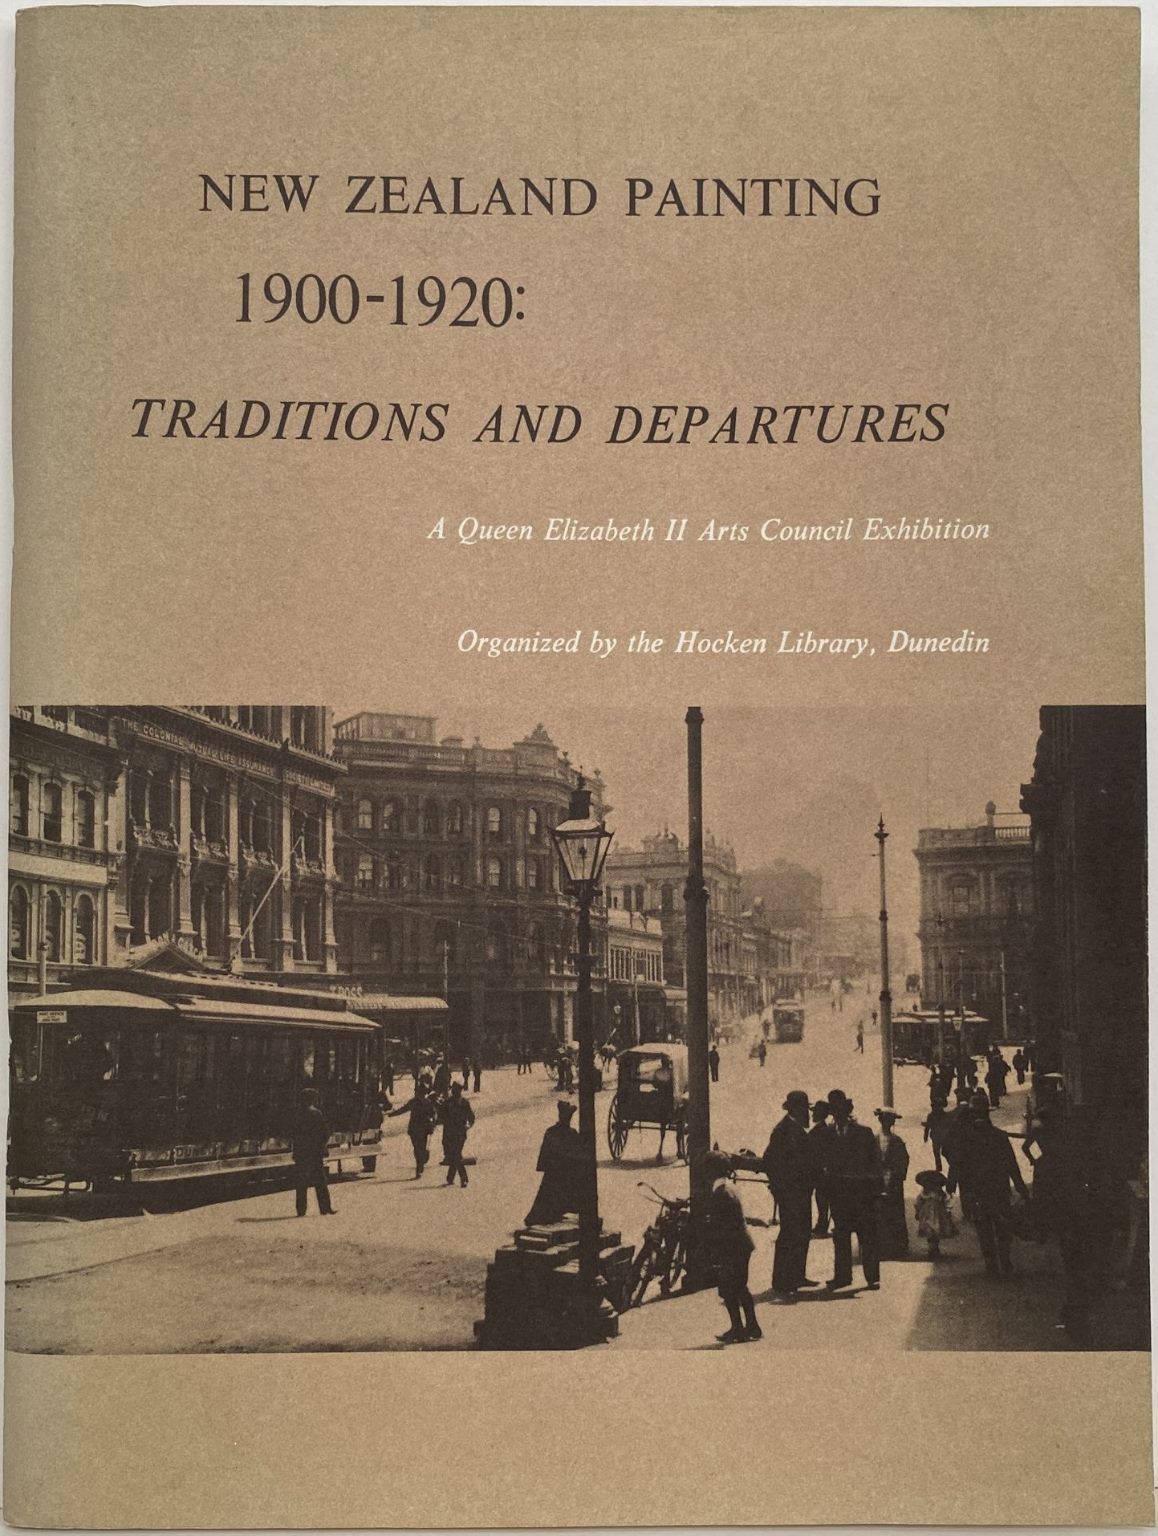 NEW ZEALAND PAINTING 1900 - 1920: Traditions and Departures